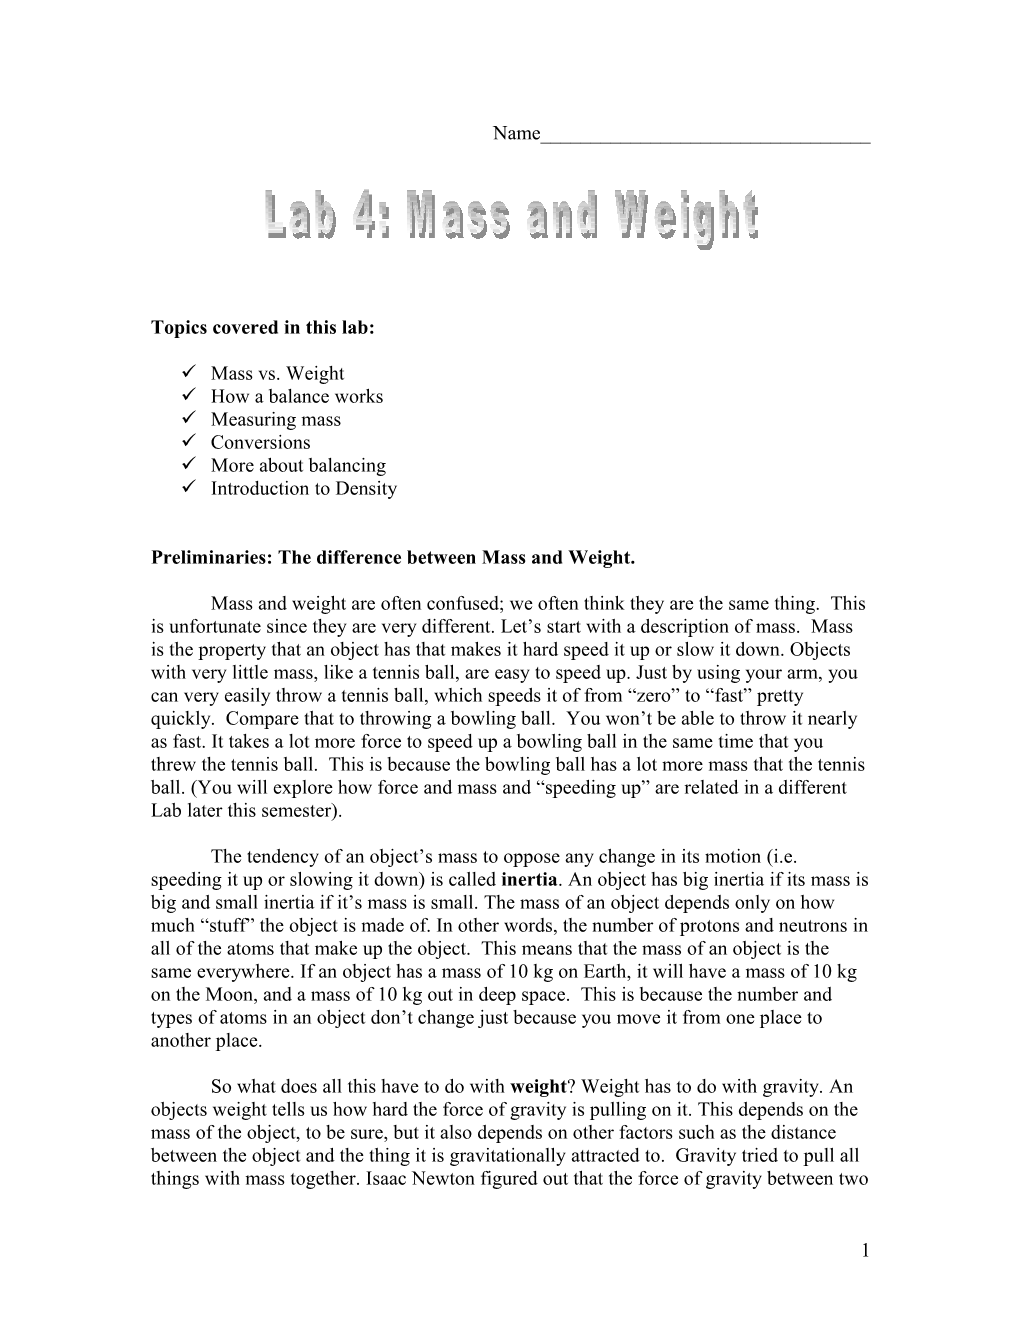 Measurements of Mass and Weight Lab 3